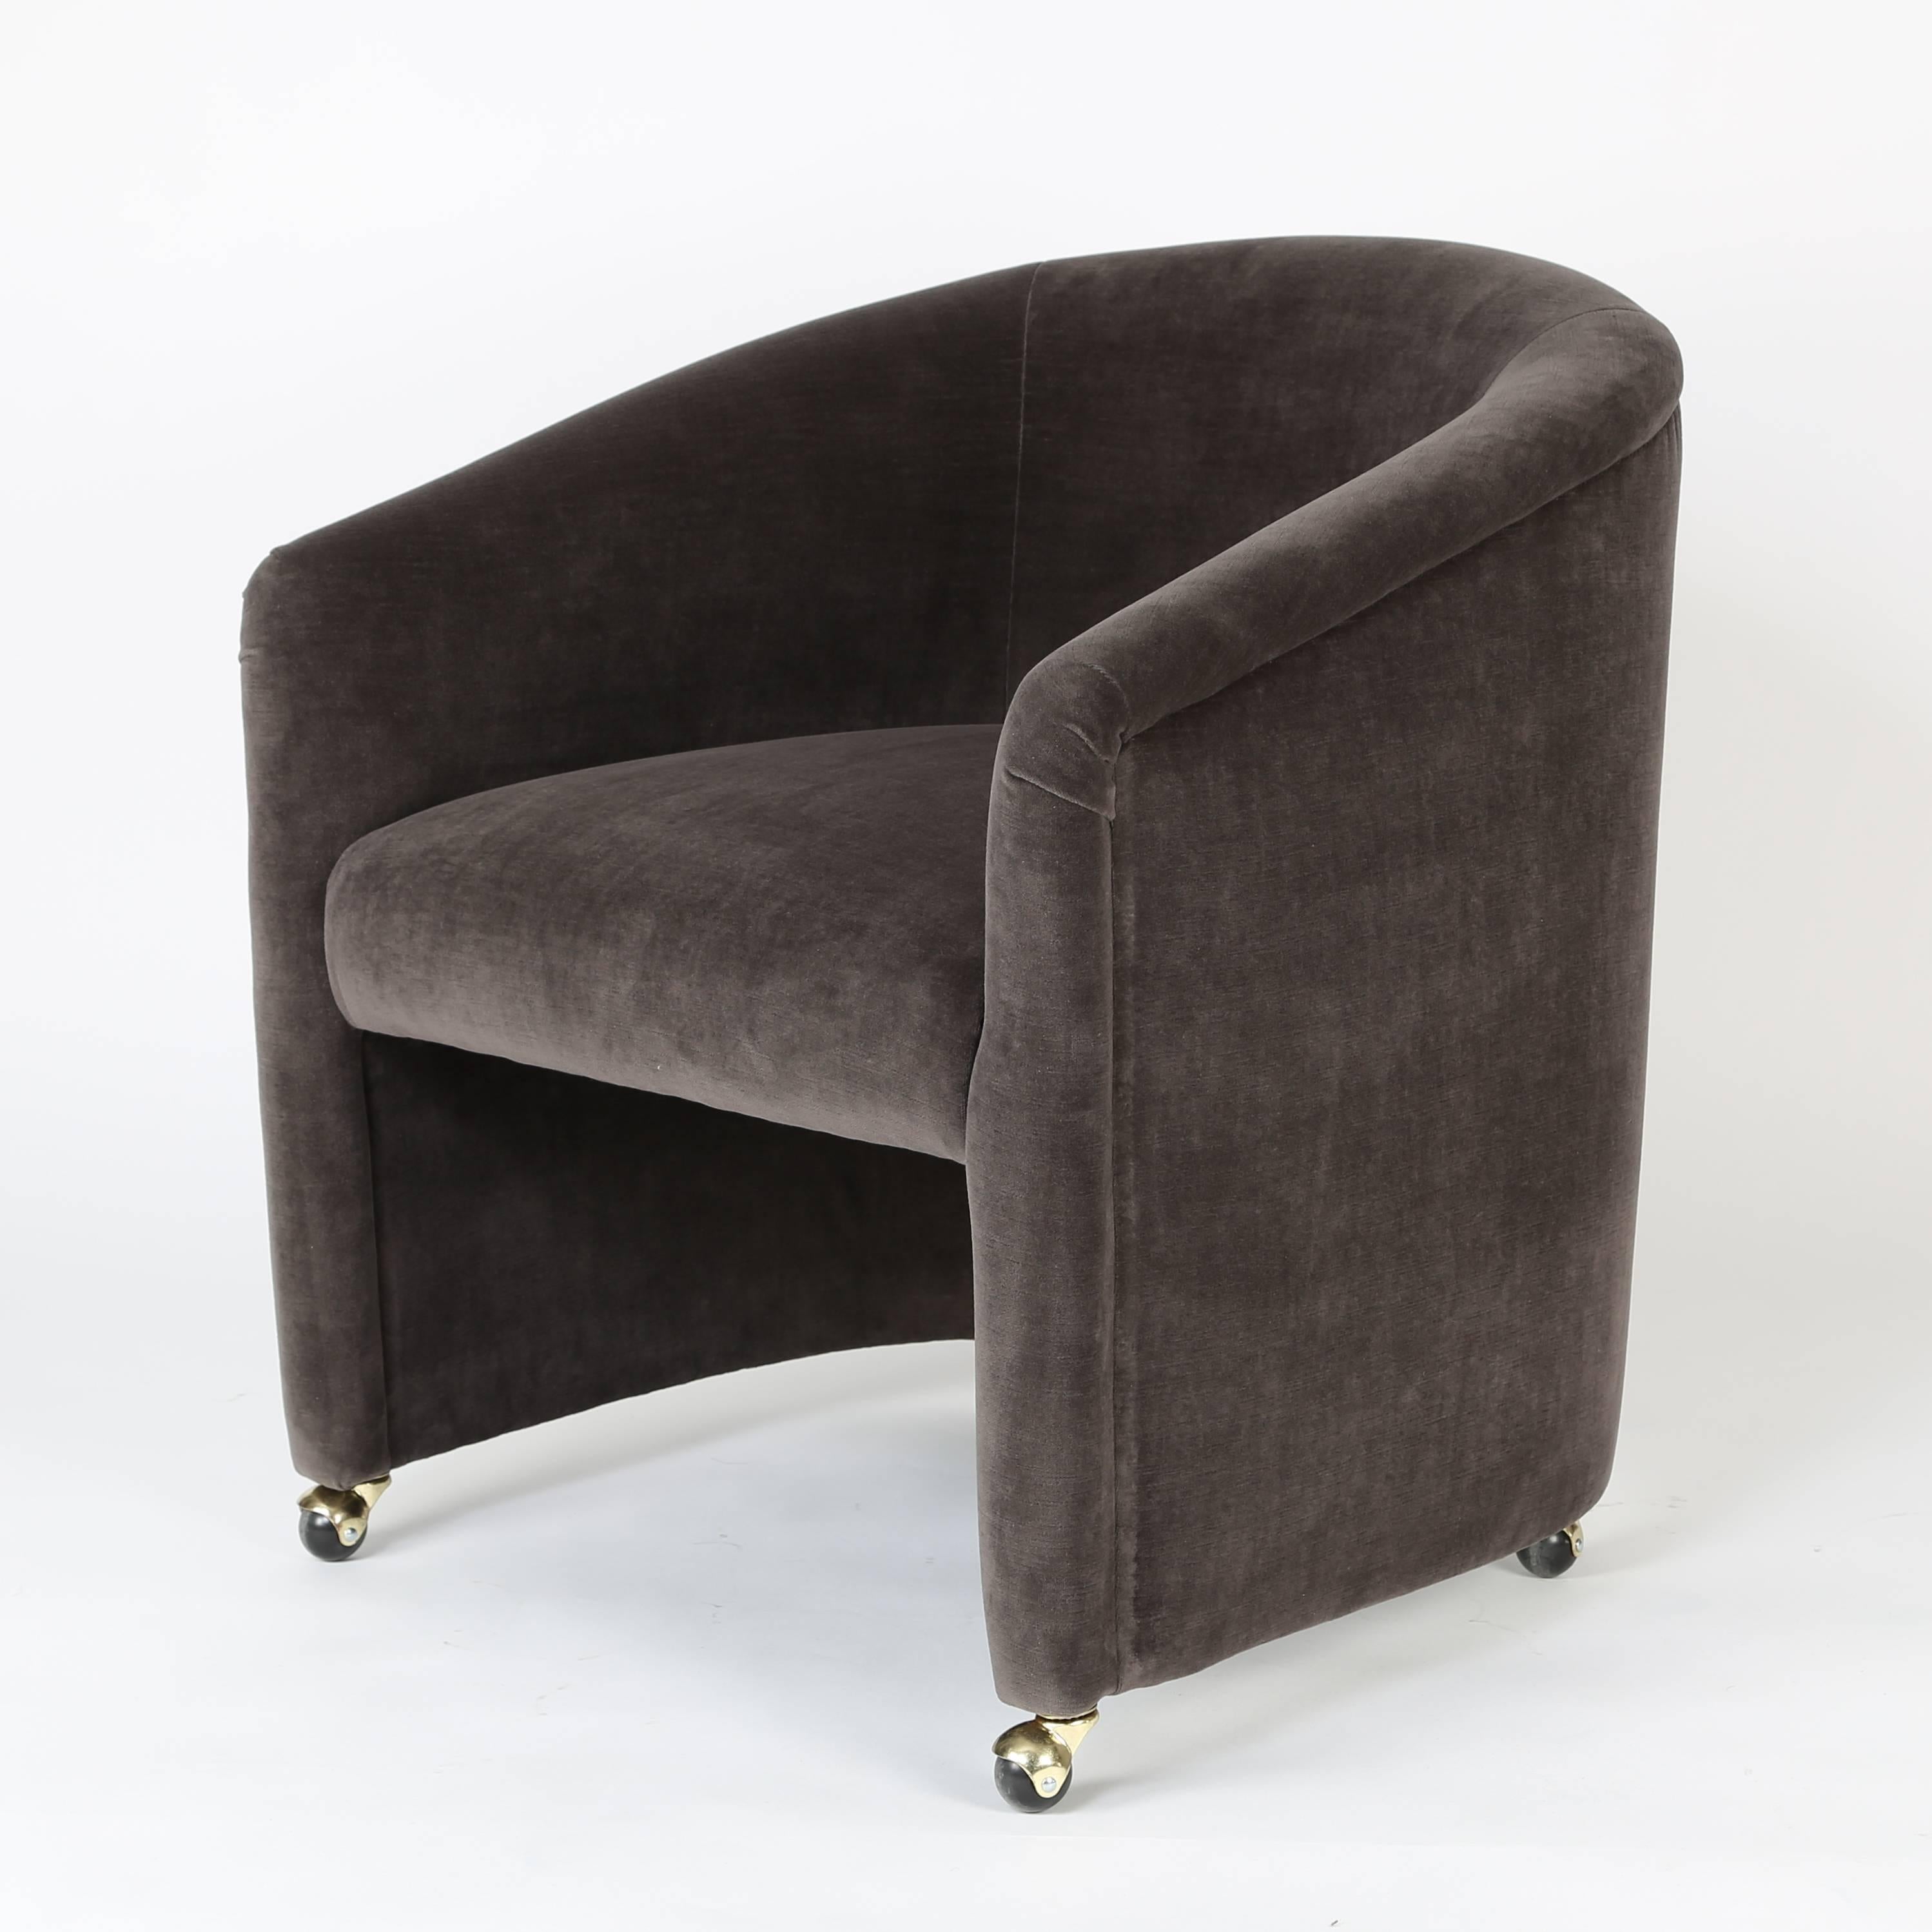 Vintage barrel-back tub chair on brass-finished casters, restored and reupholstered in a warm-grey antiqued cotton velvet. Substantial and comfortable enough to use in a living-room seating group.

See this chair in our Brooklyn showroom, 61